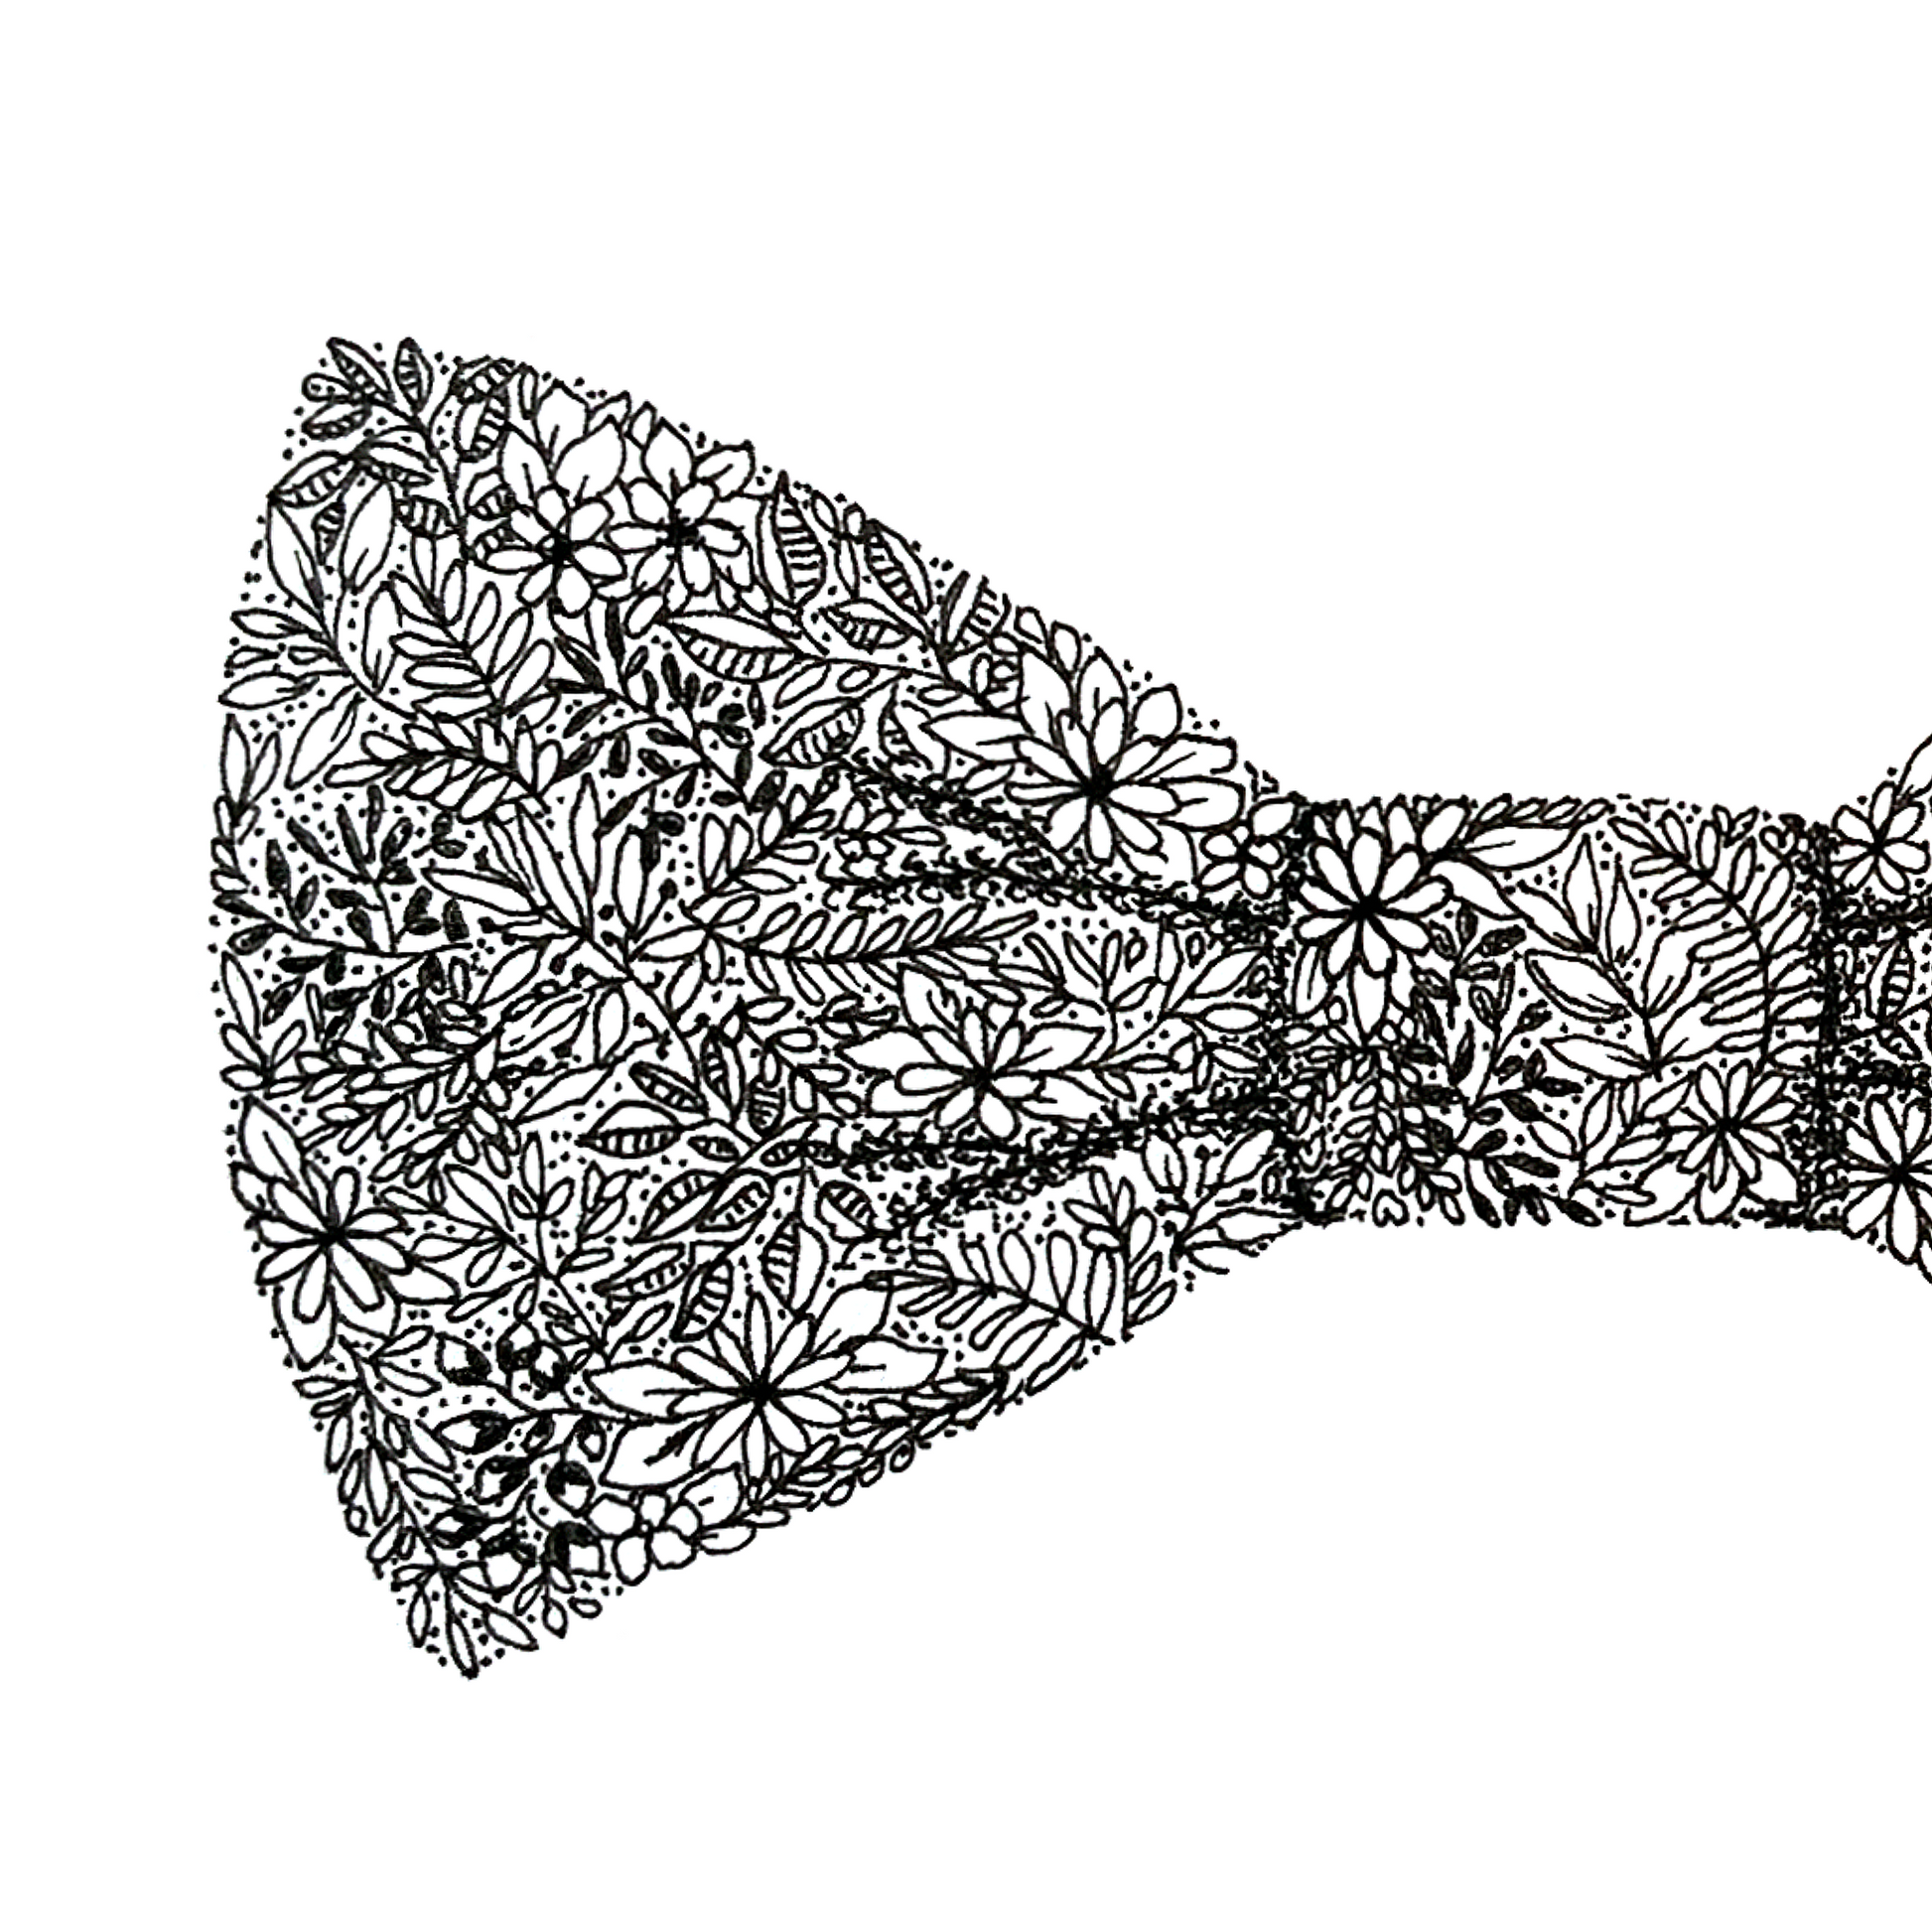 Image shows close up of an illustration of a bow. Great detail to be seen in the black and white floral drawings that the bow is made up of. the left side and middle of the bow to be seen in this image. 